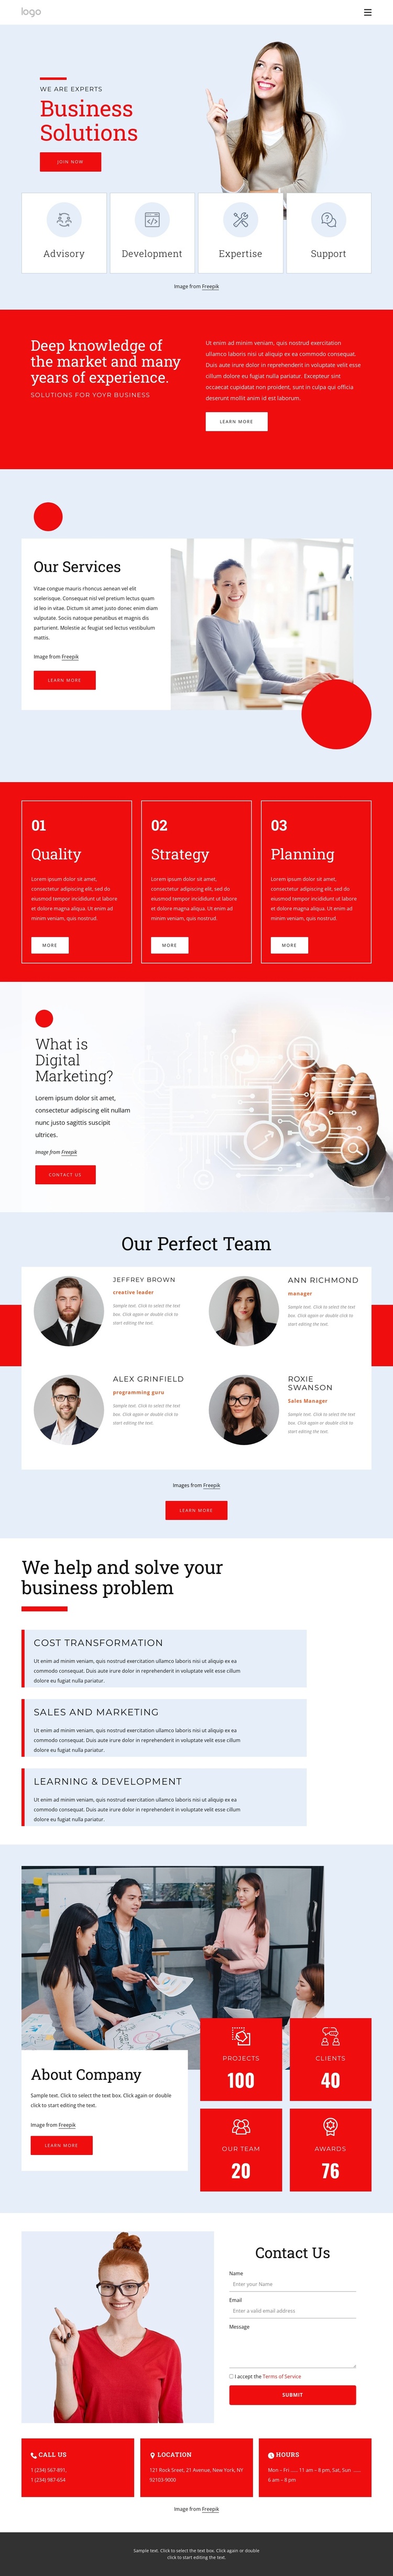 We are experts in business solutions Joomla Template